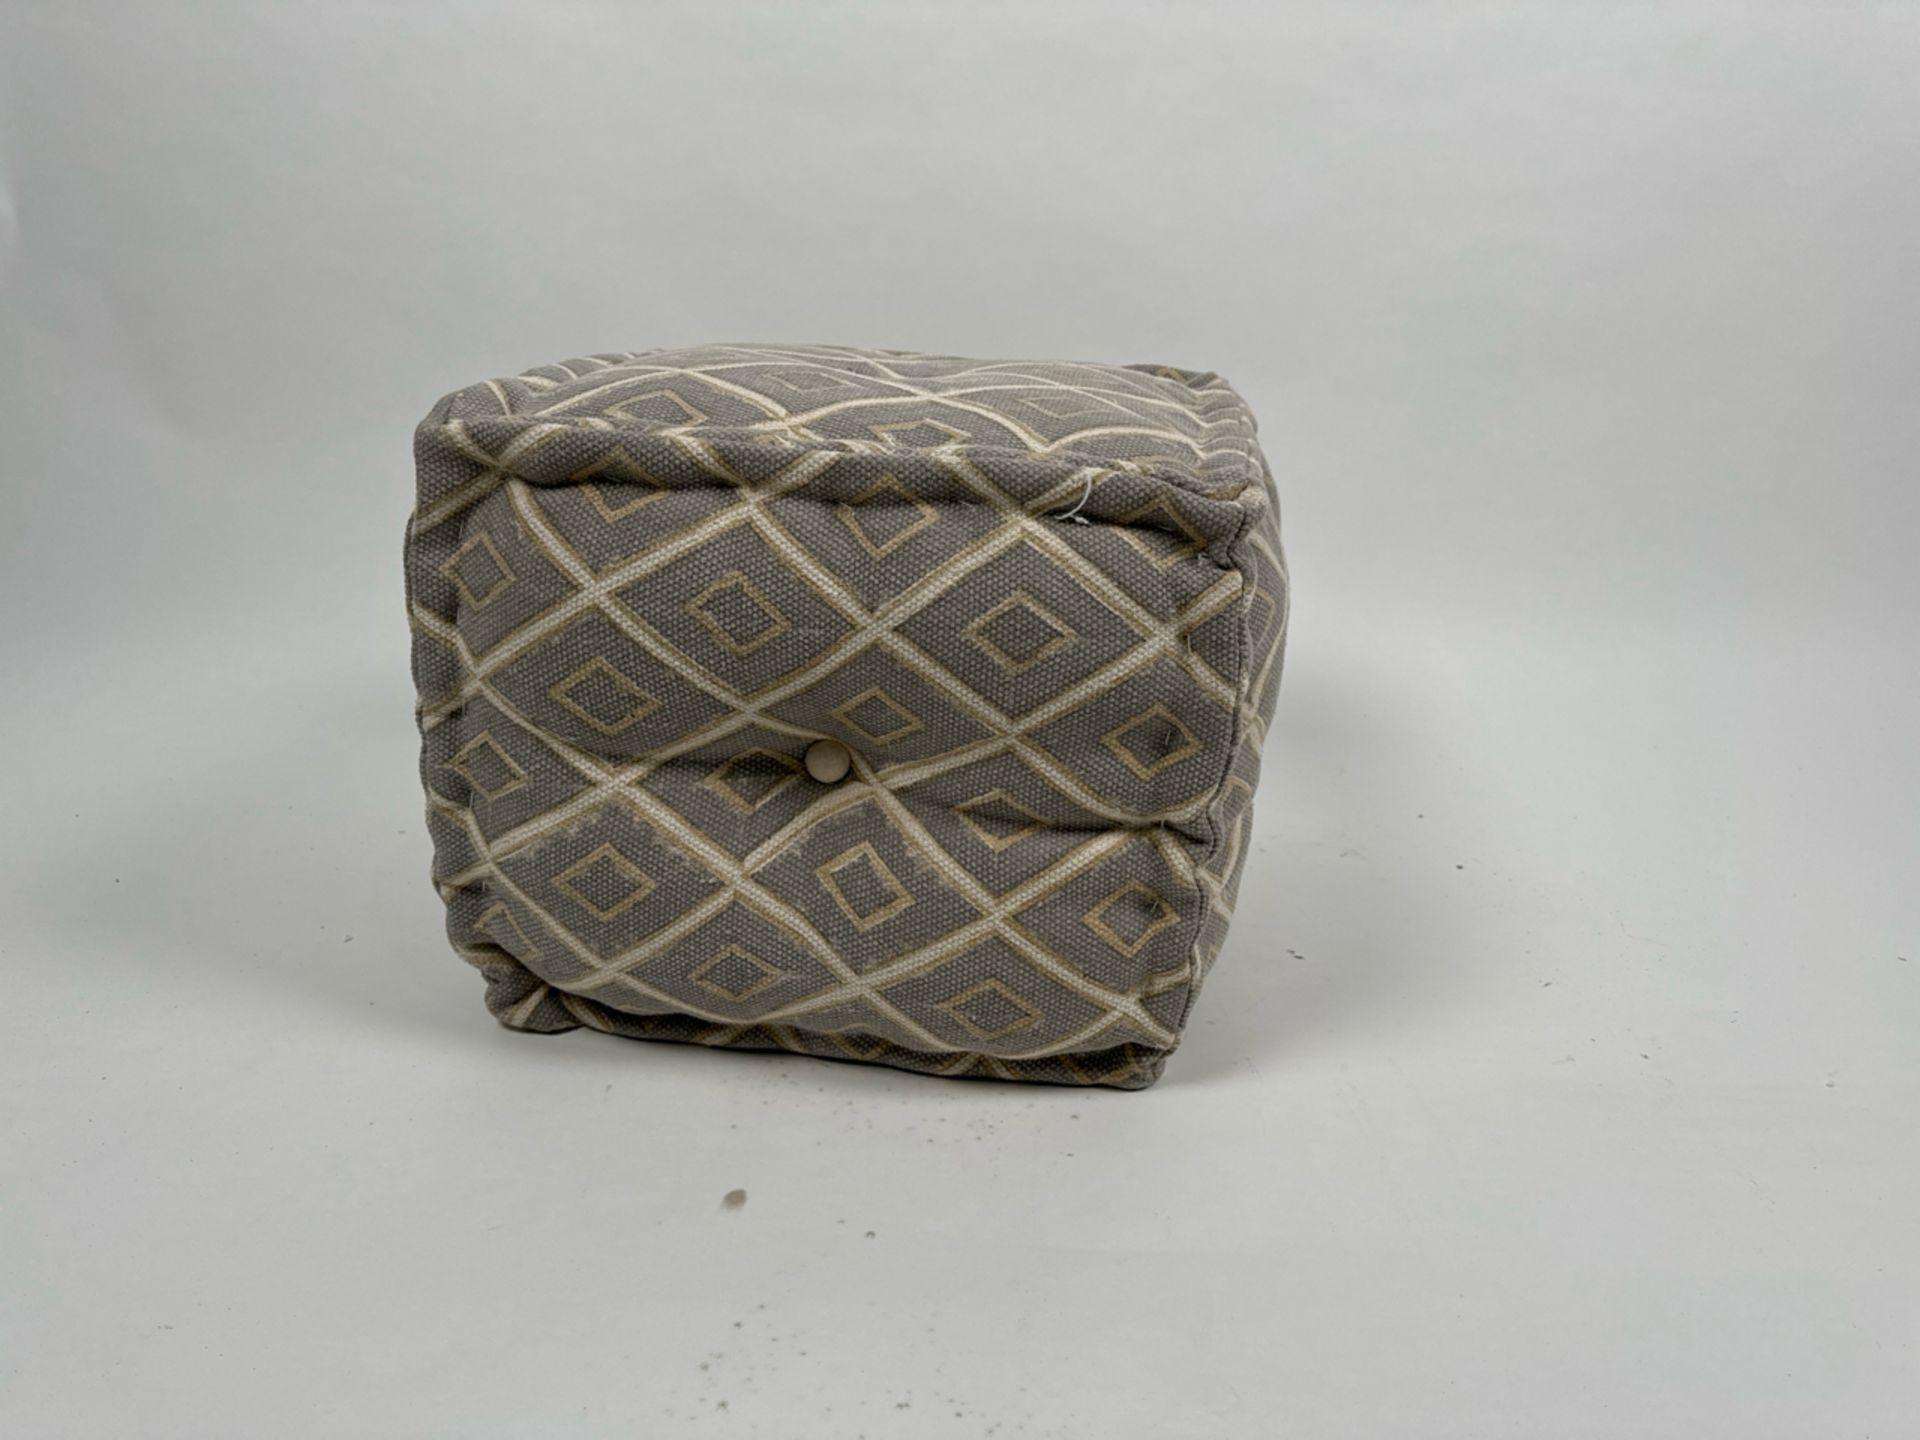 Patterned Fabric Cushioned Pouffe - Image 2 of 3